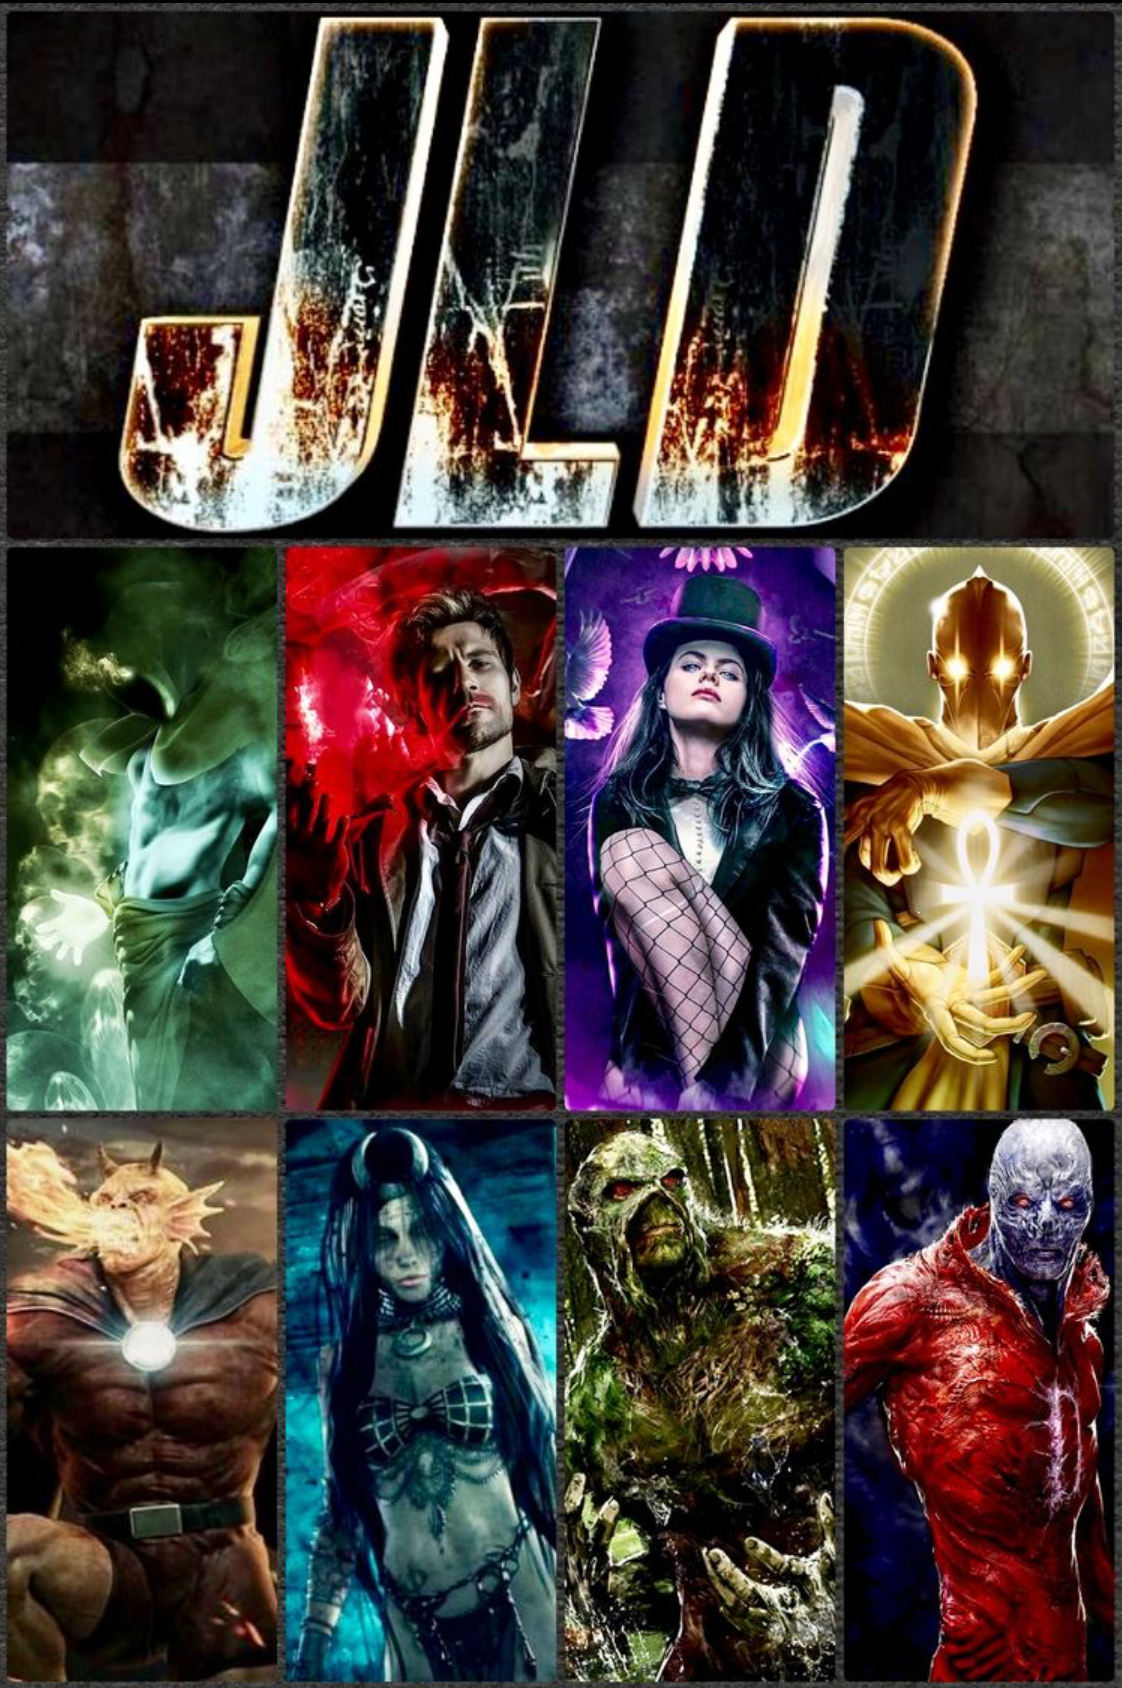 Contact Support. Justice league dark, Comic movies, Universe movie